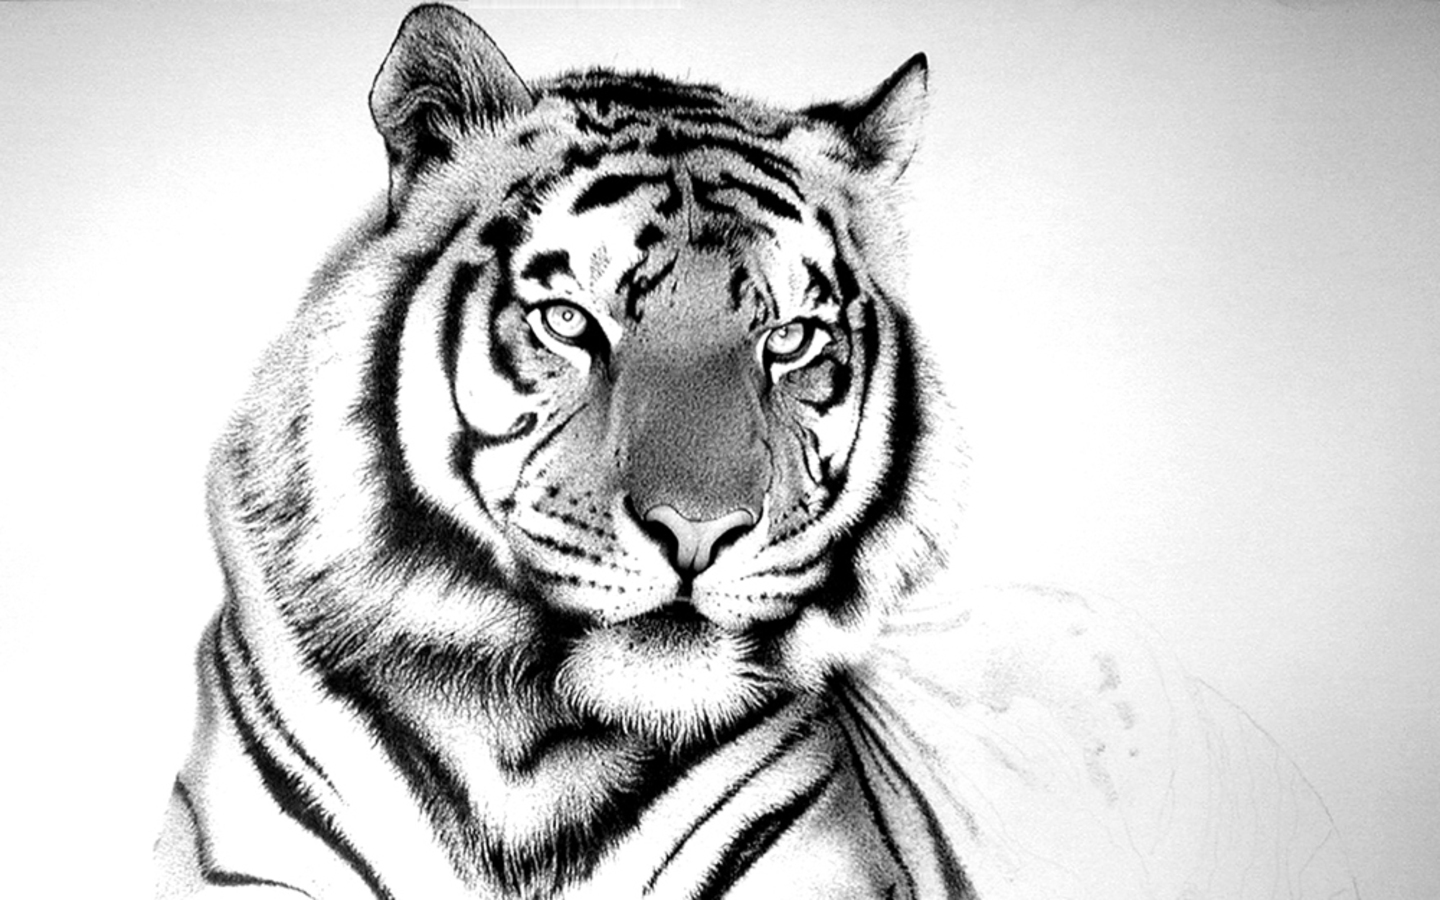 Black Tiger Hd Wallpapers For Mobile